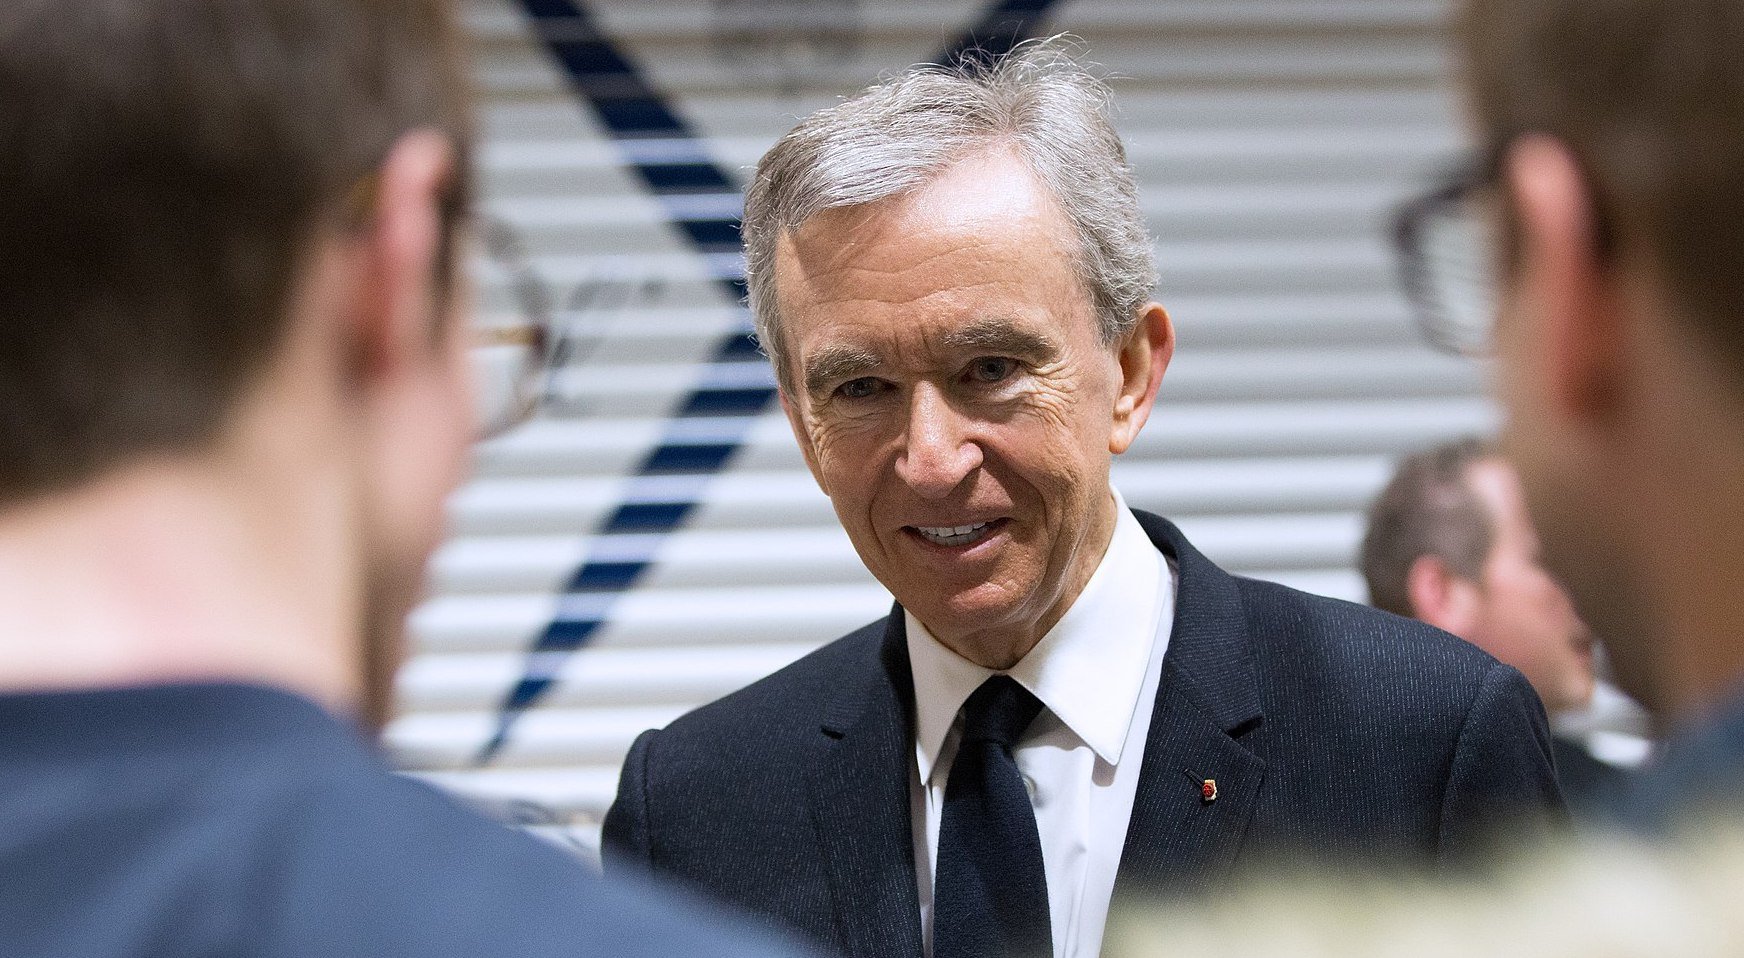 The luxury king: Here is a list of all the brands owned by Bernard Arnault  under LVMH - Nairametrics